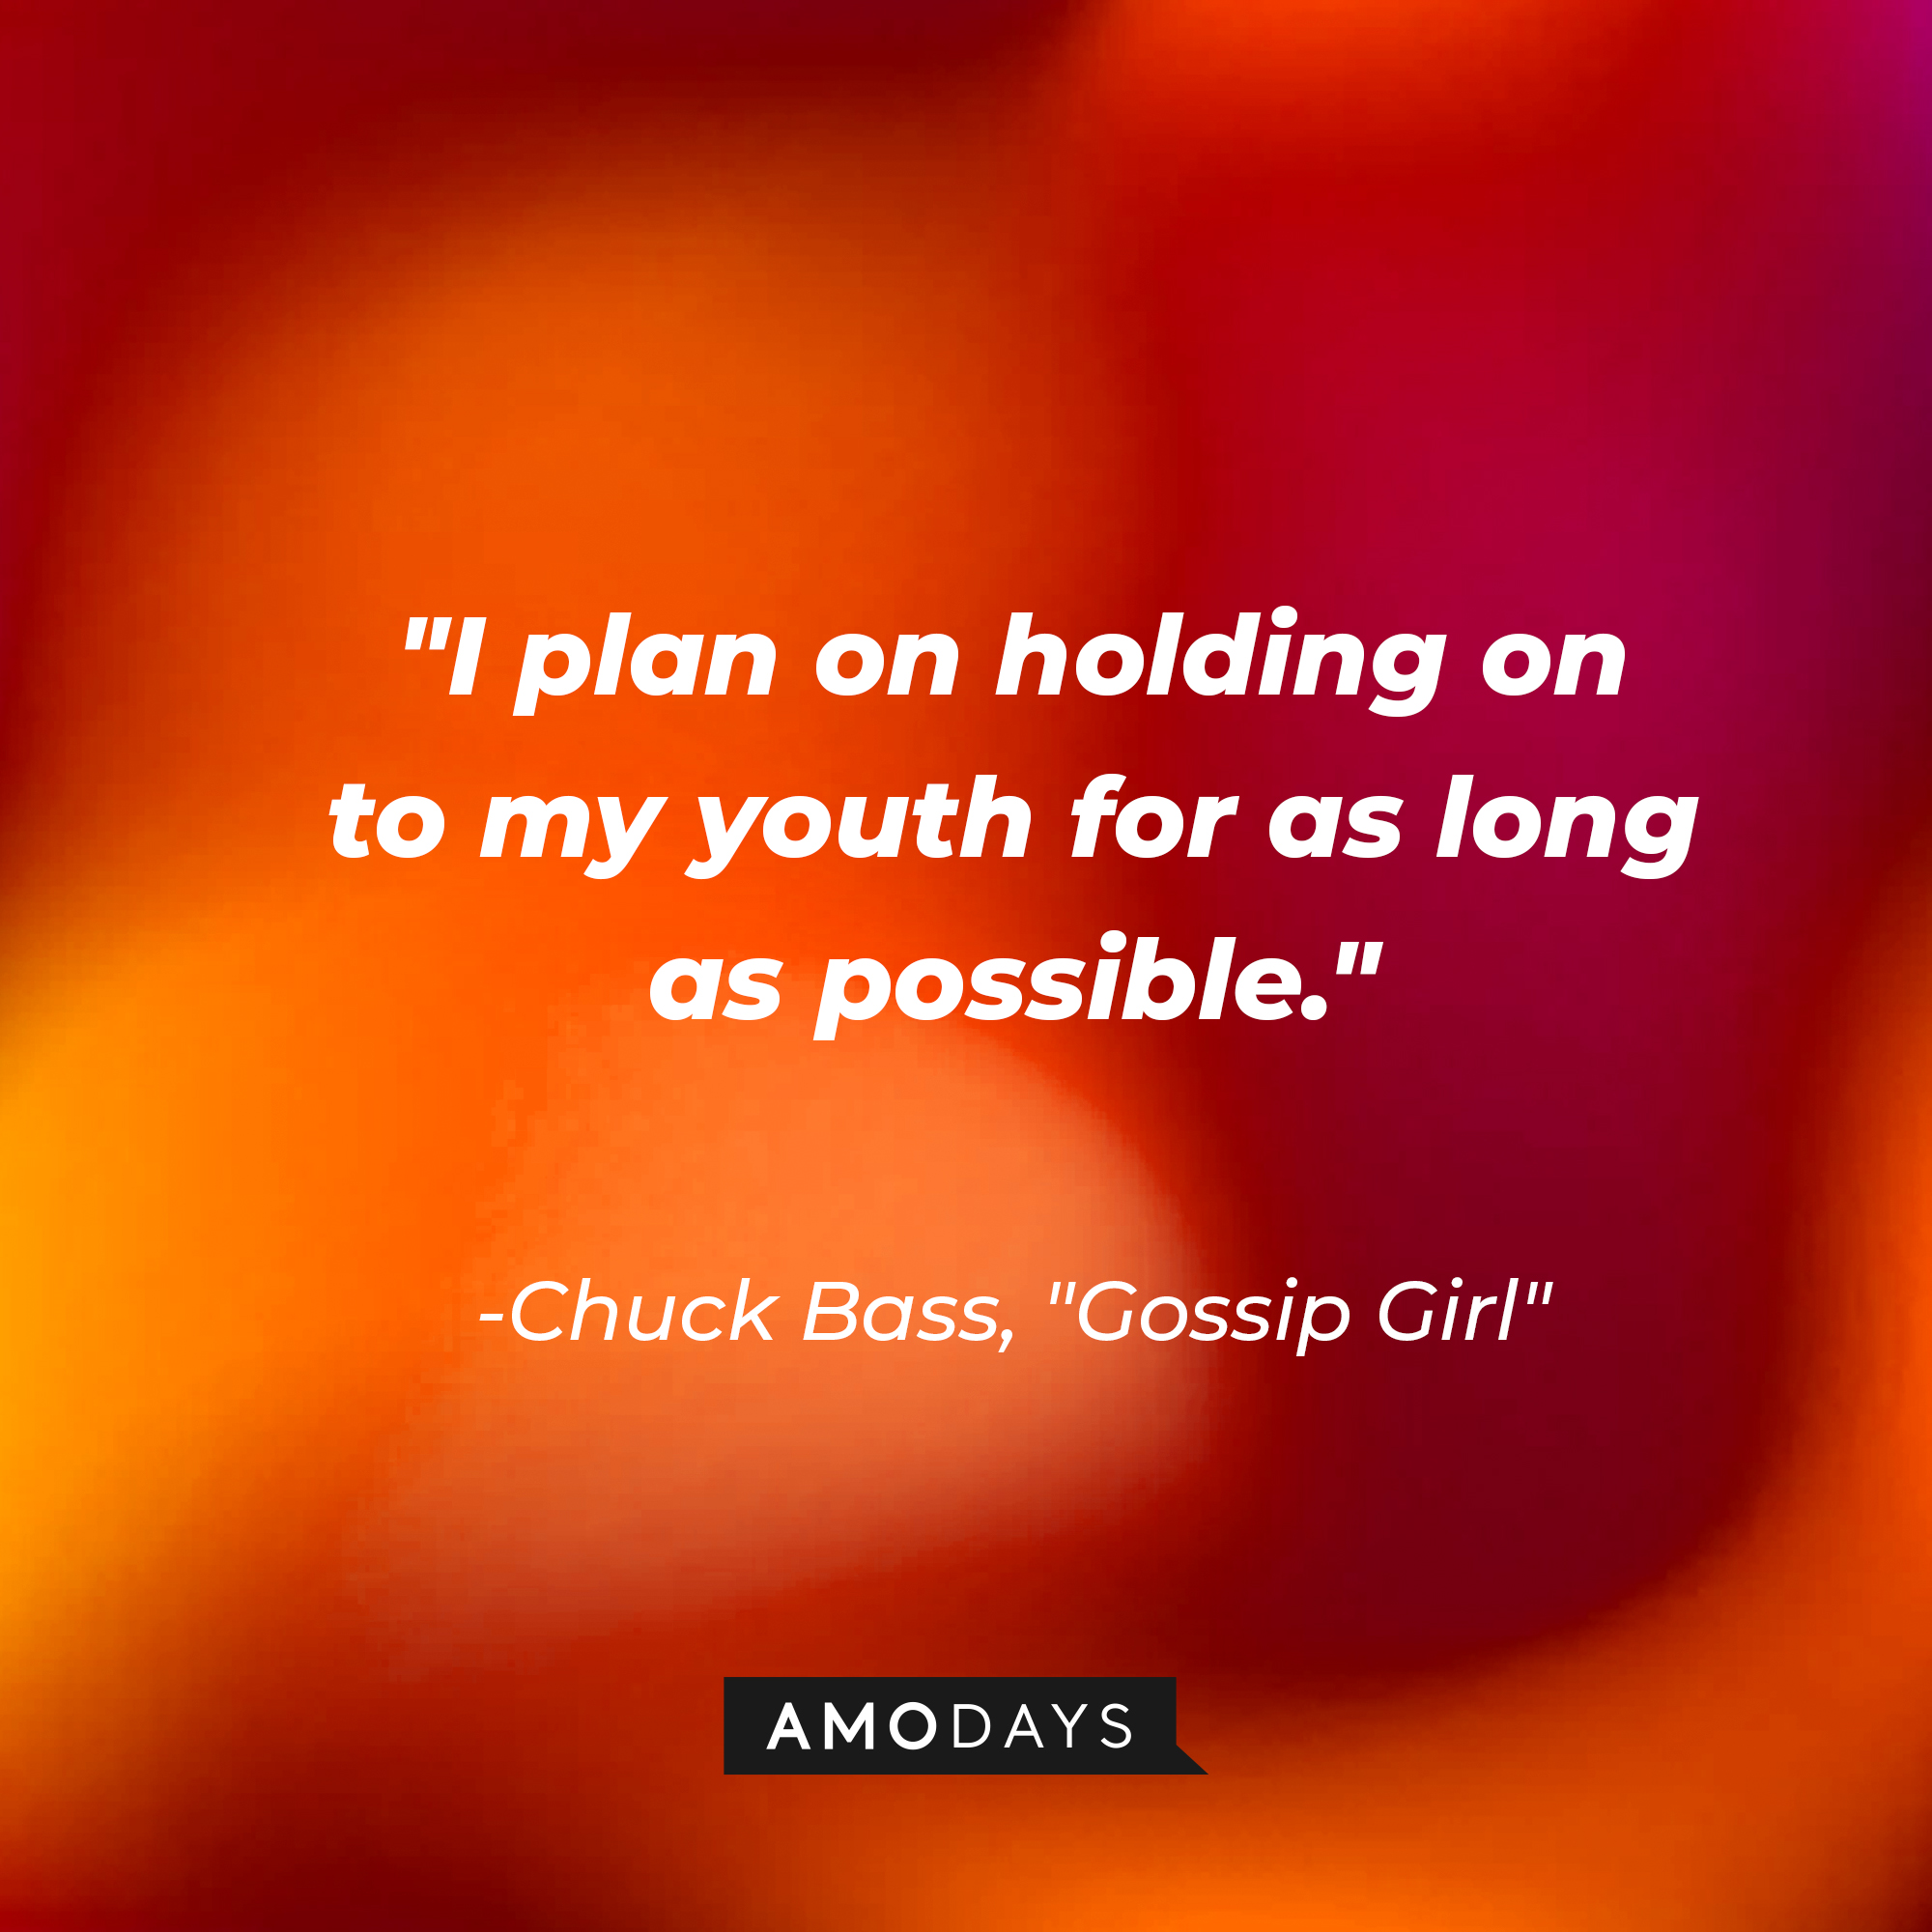 Chuck Bass' quote: "I plan on holding on to my youth for as long as possible." | Source: AmoDays